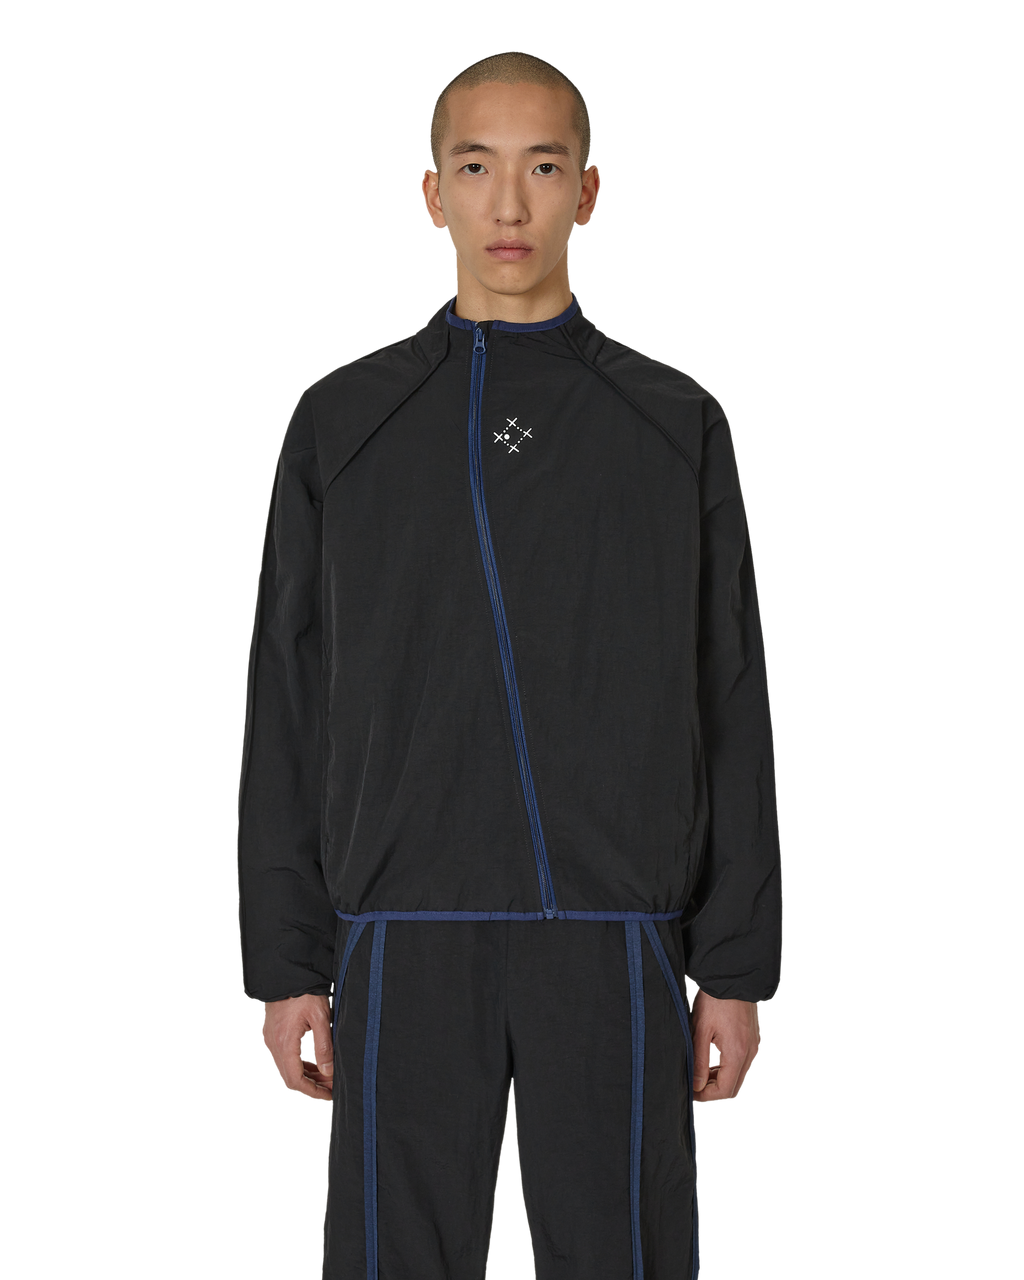 _J.L - A.L_ _J.L-A.L_ x Sound Sports Windbreaker J297464-S-Black front